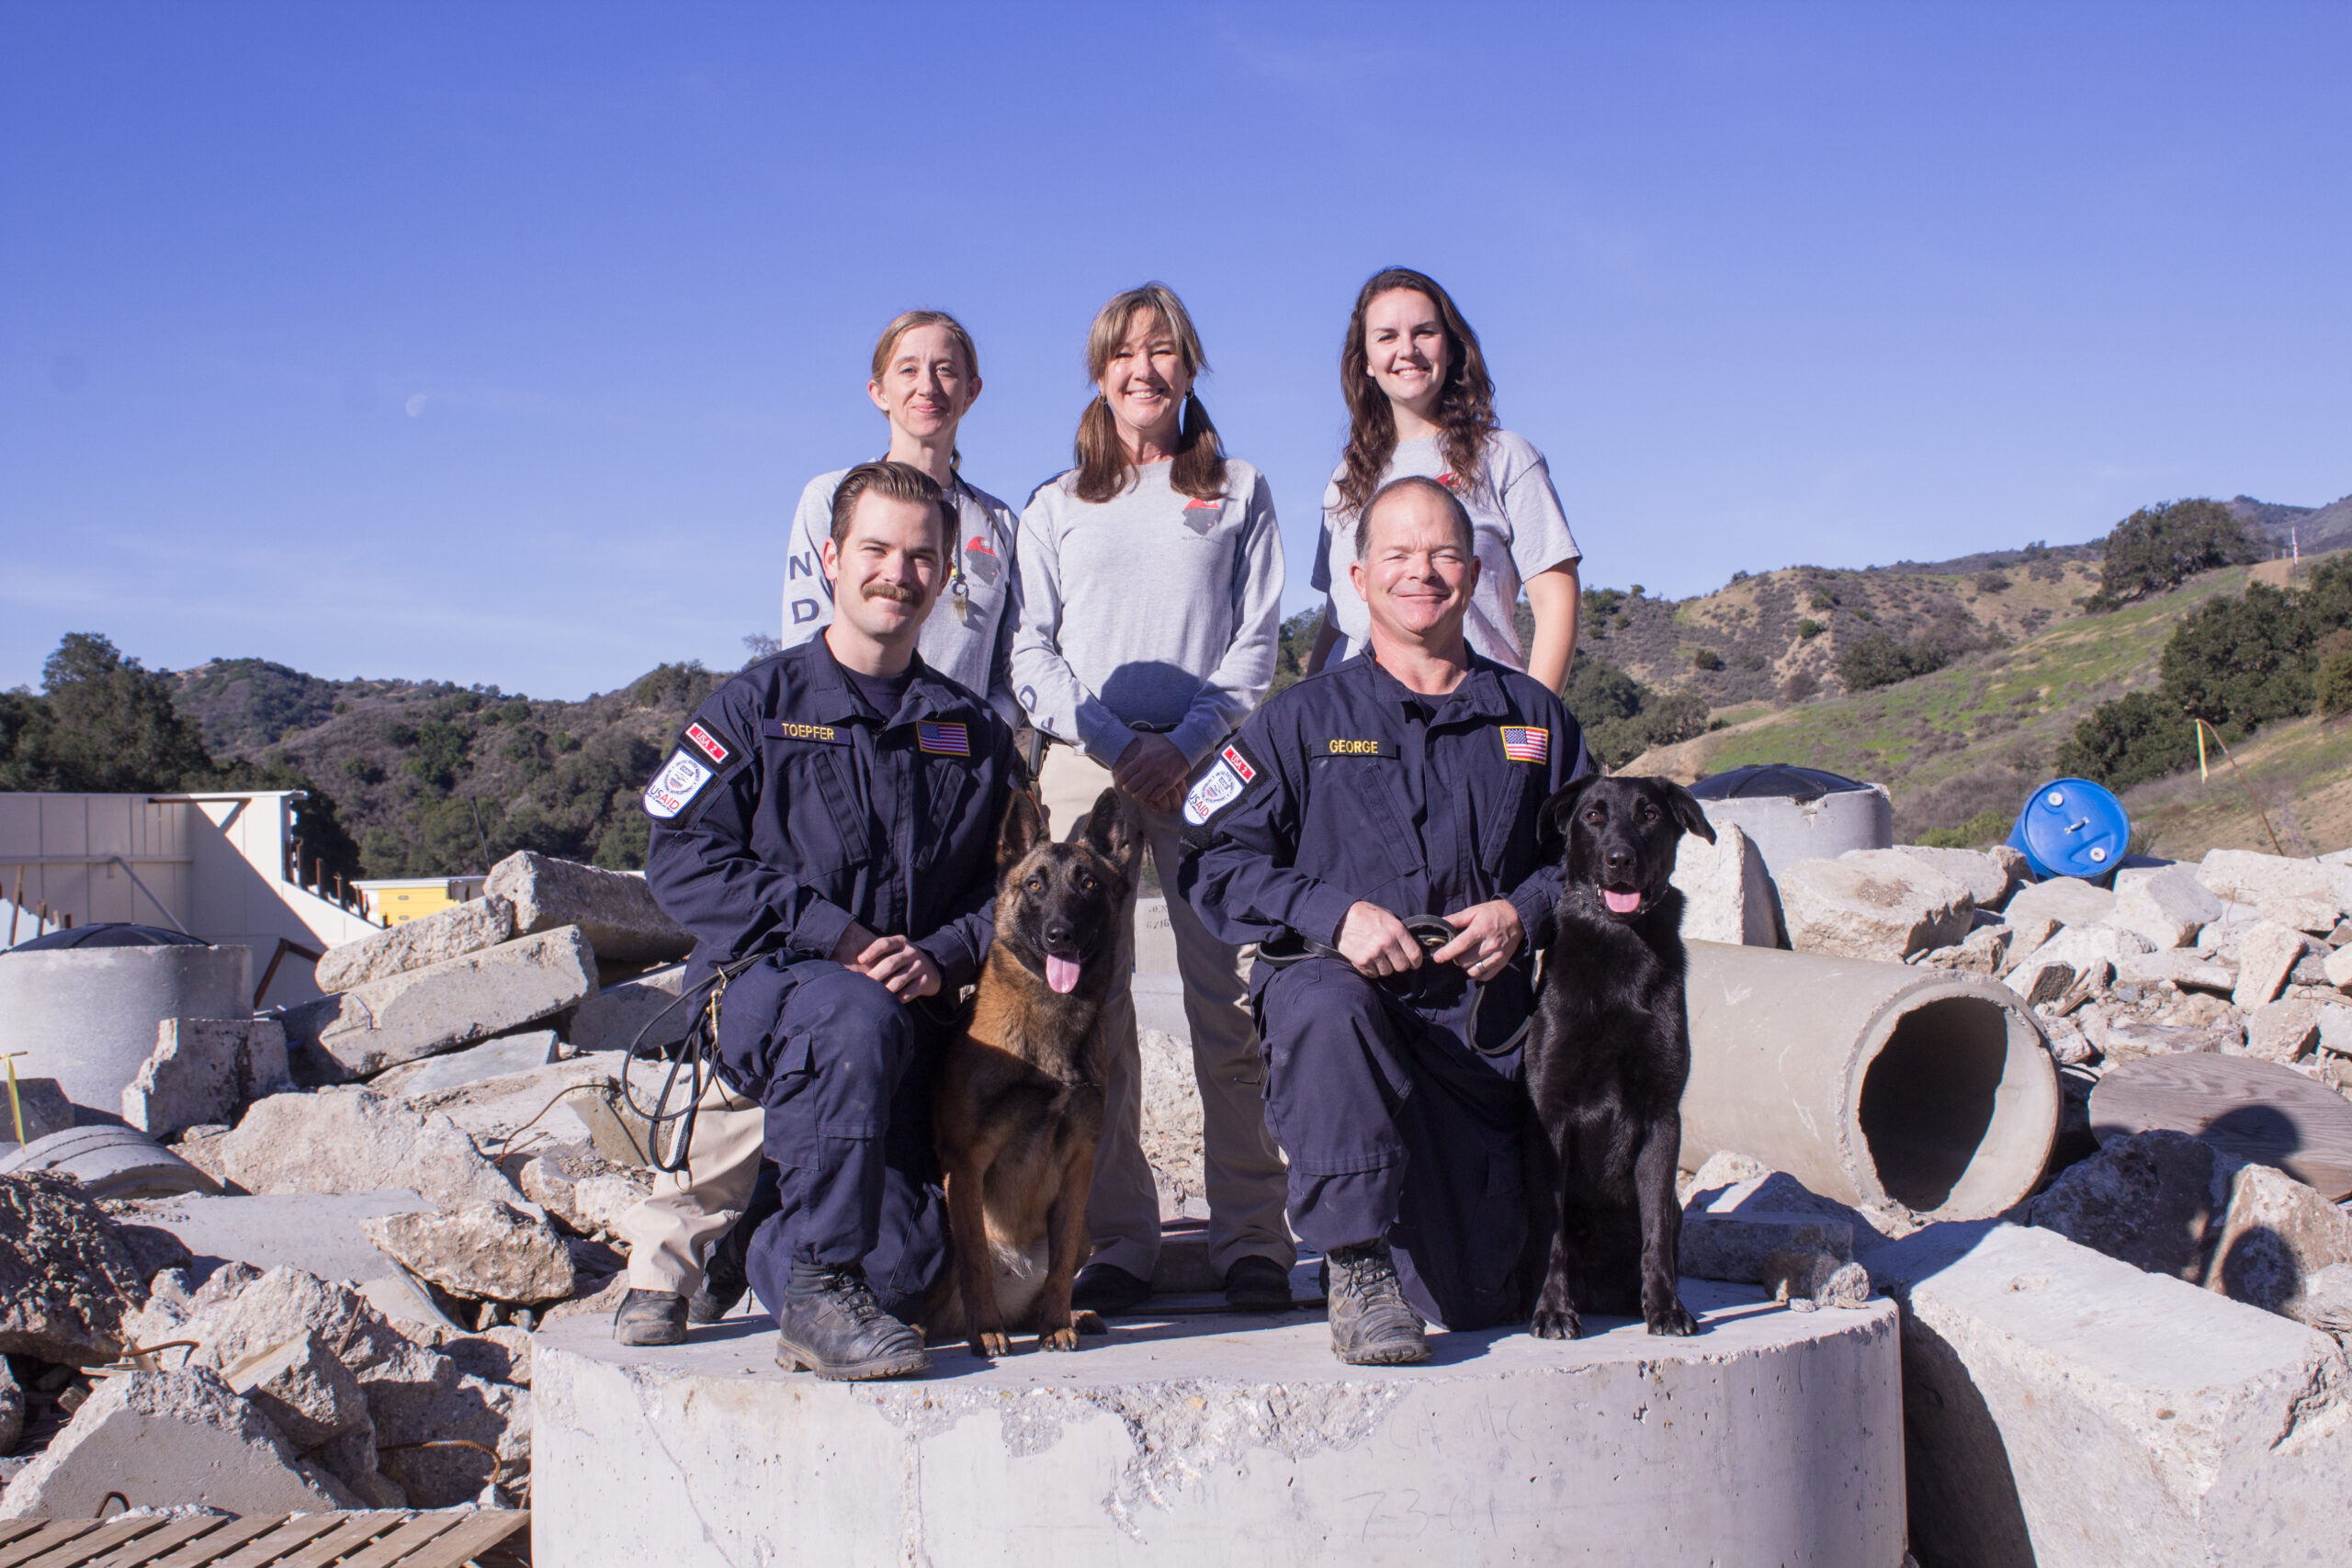 Two new Search Teams graduate and join the SDF roster!